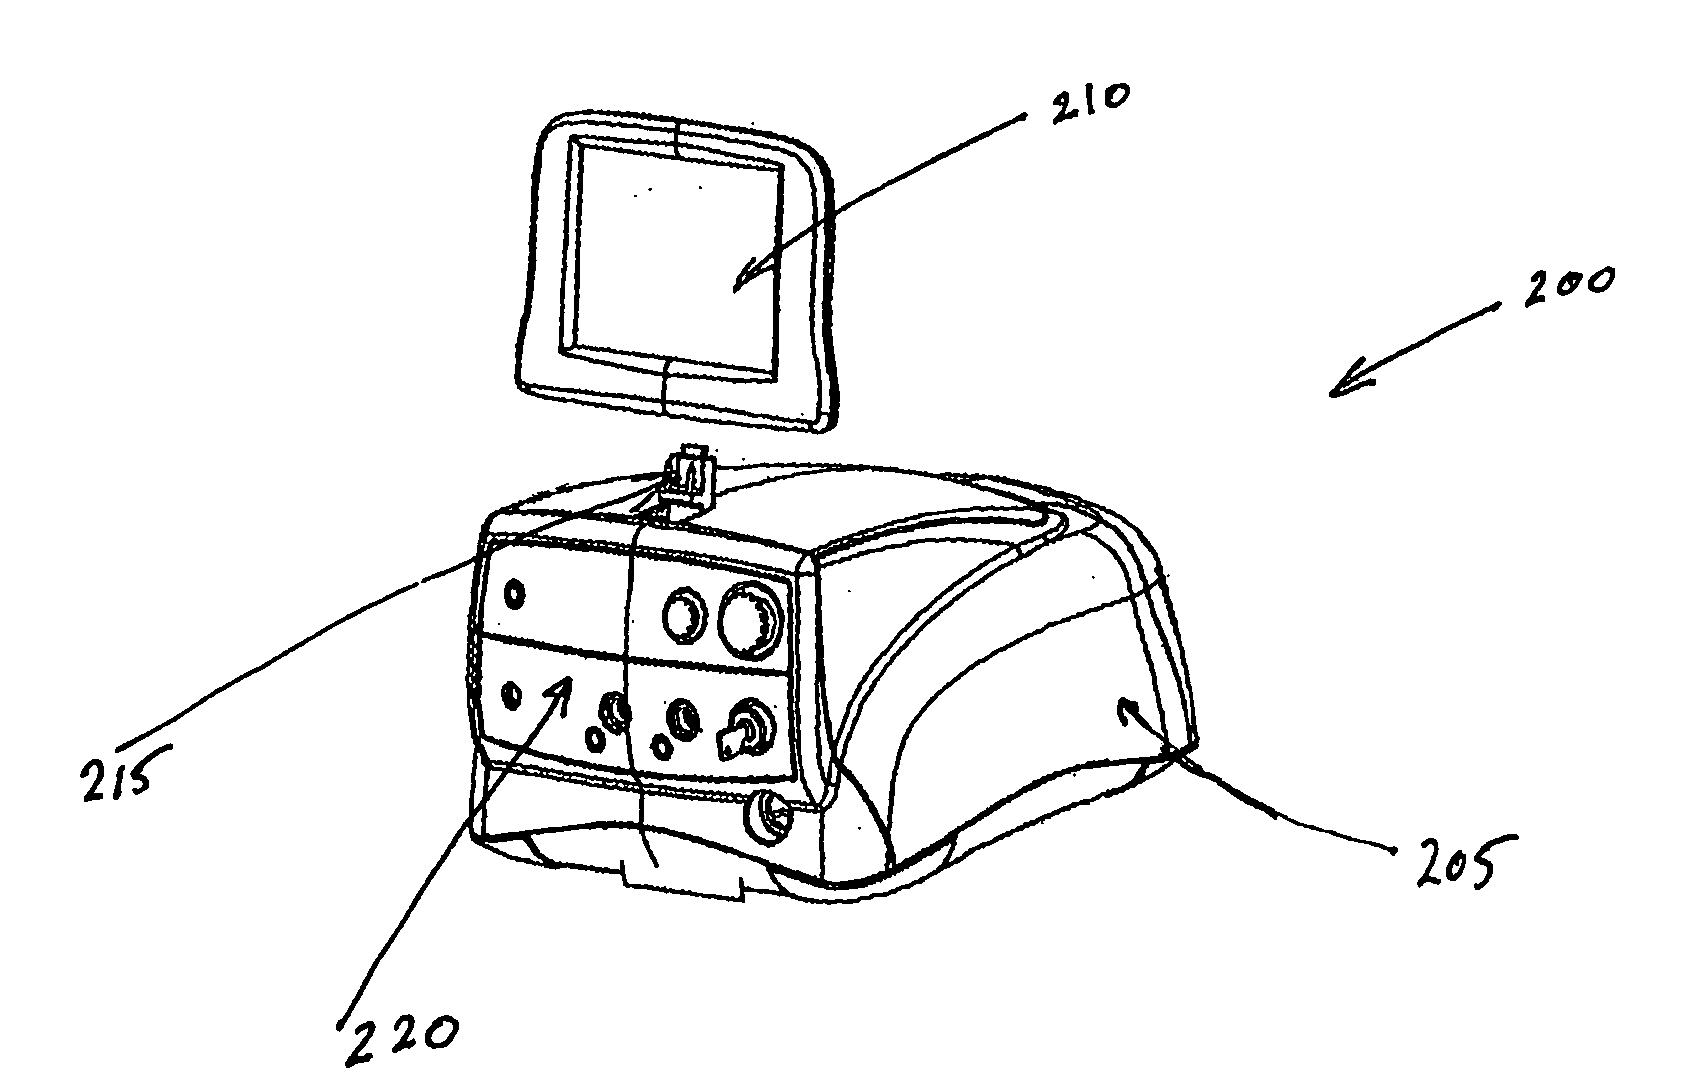 Surgical machine with removable display